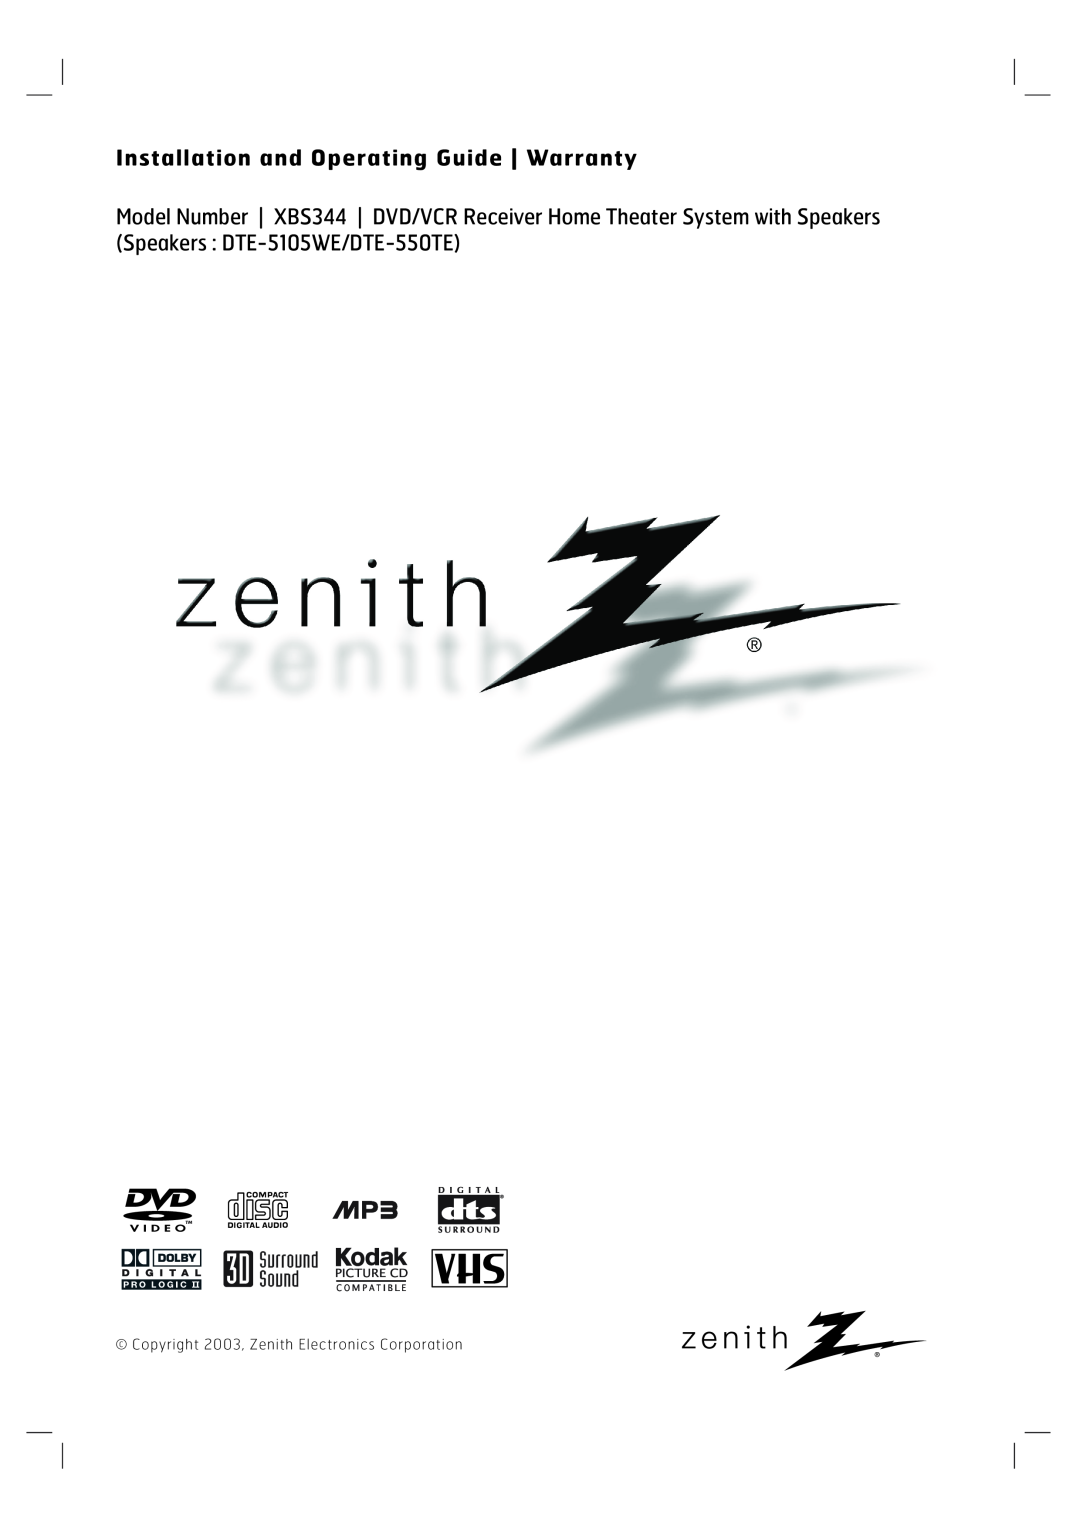 Zenith XBS344 warranty Installation and Operating Guide Warranty, Copyright 2003, Zenith Electronics Corporation 